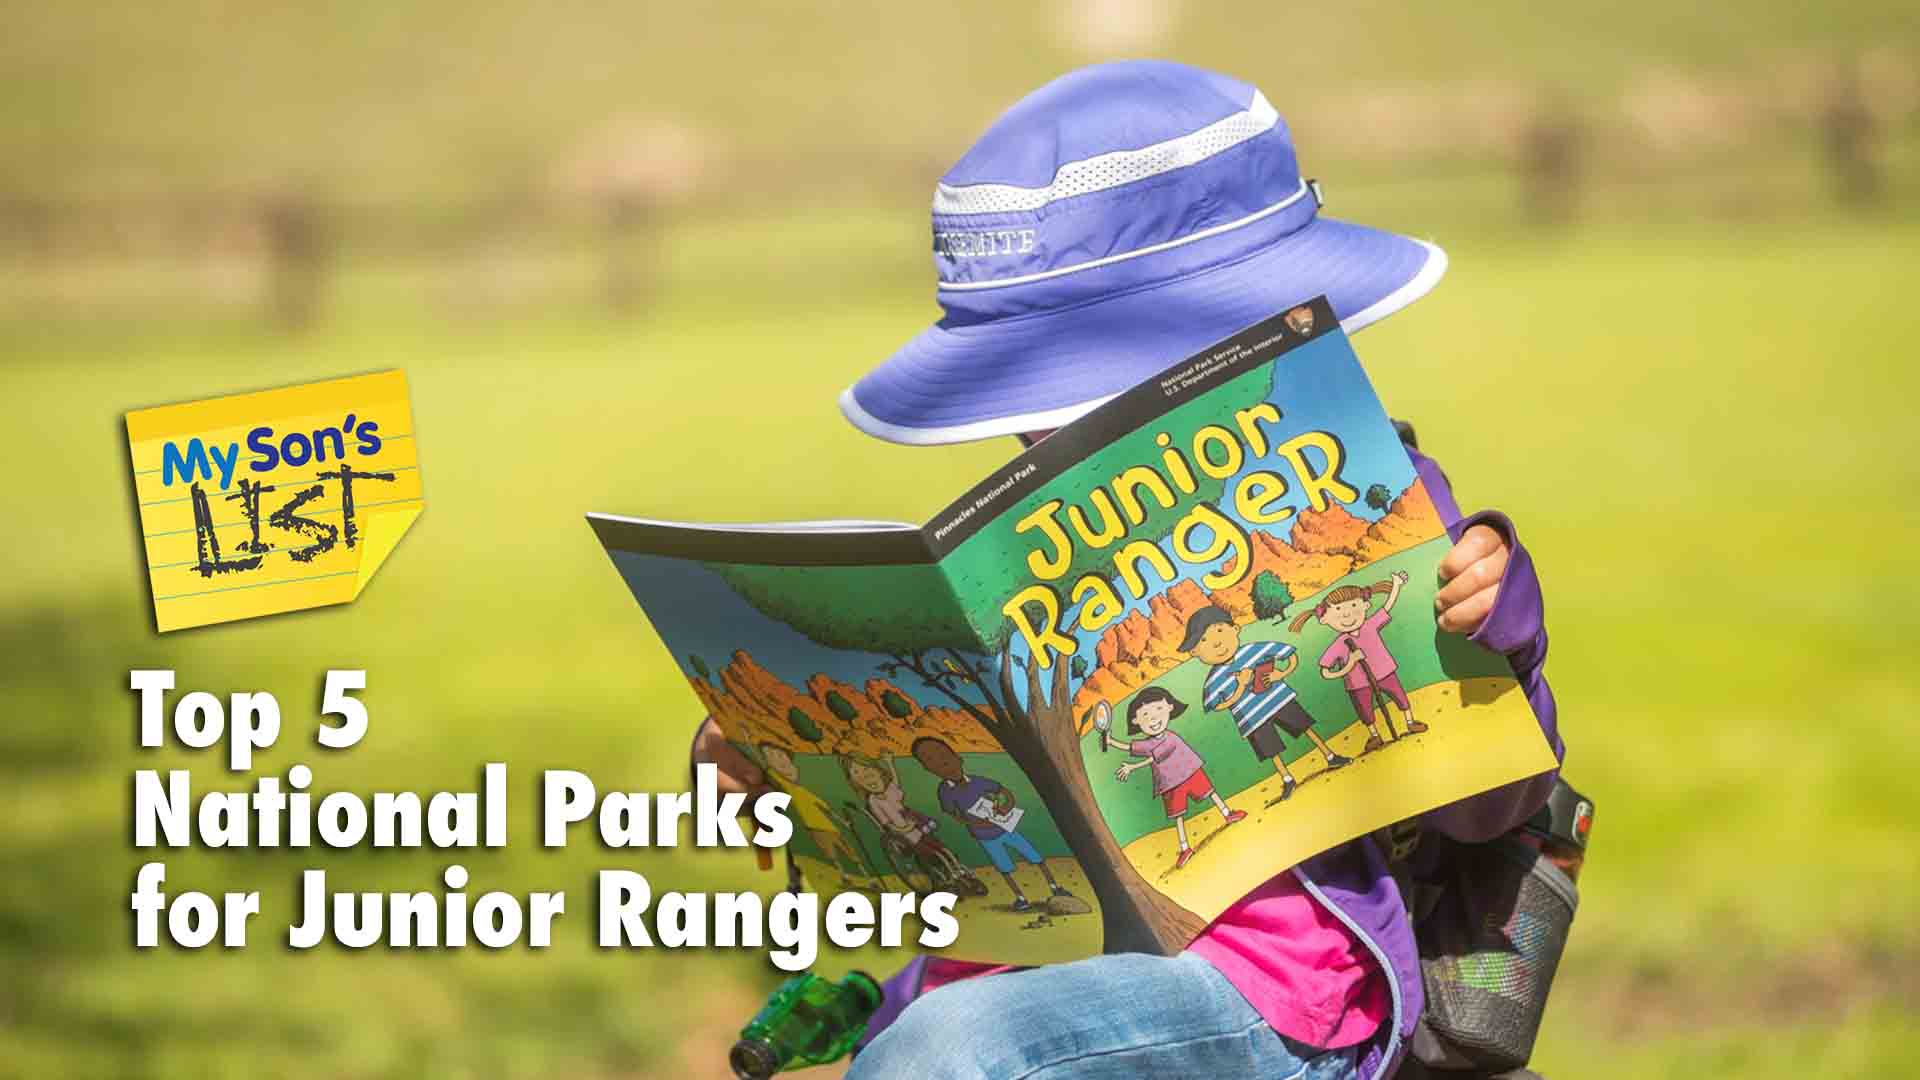 My Sons List of Top 5 National Parks for Junior Rangers 